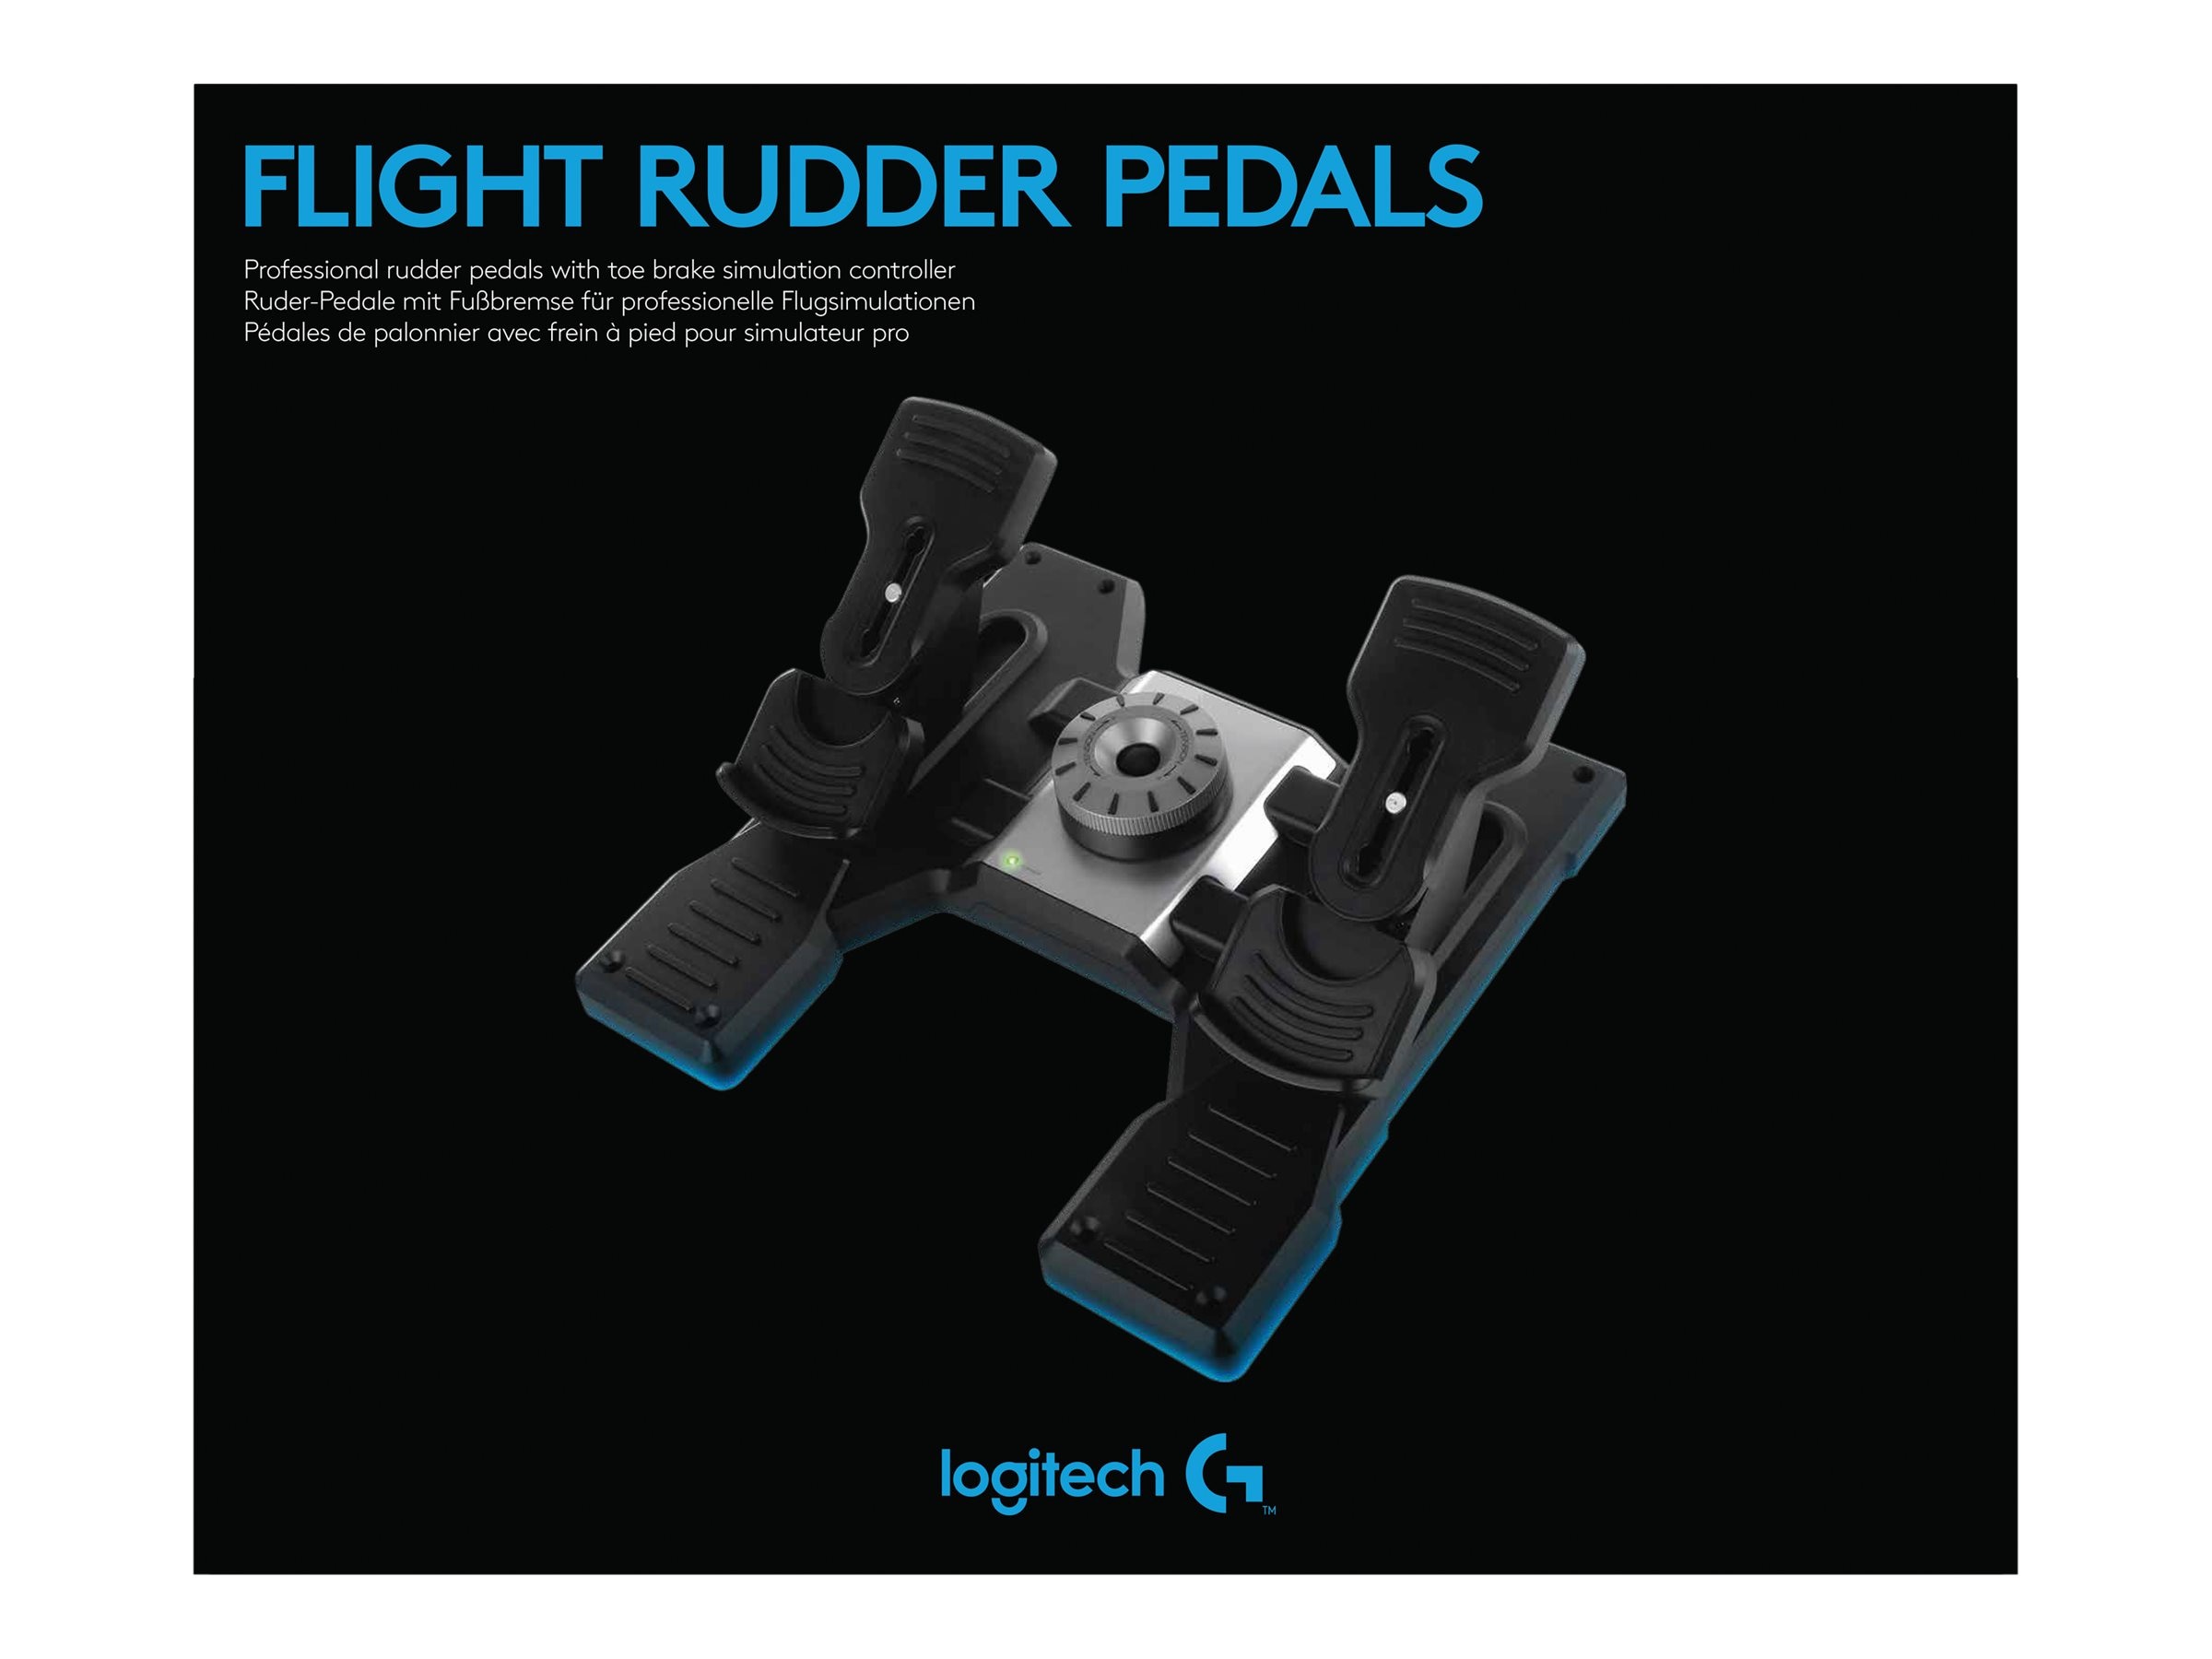 Logitech Professional Simulation Ridder Pedals with Toe Brake